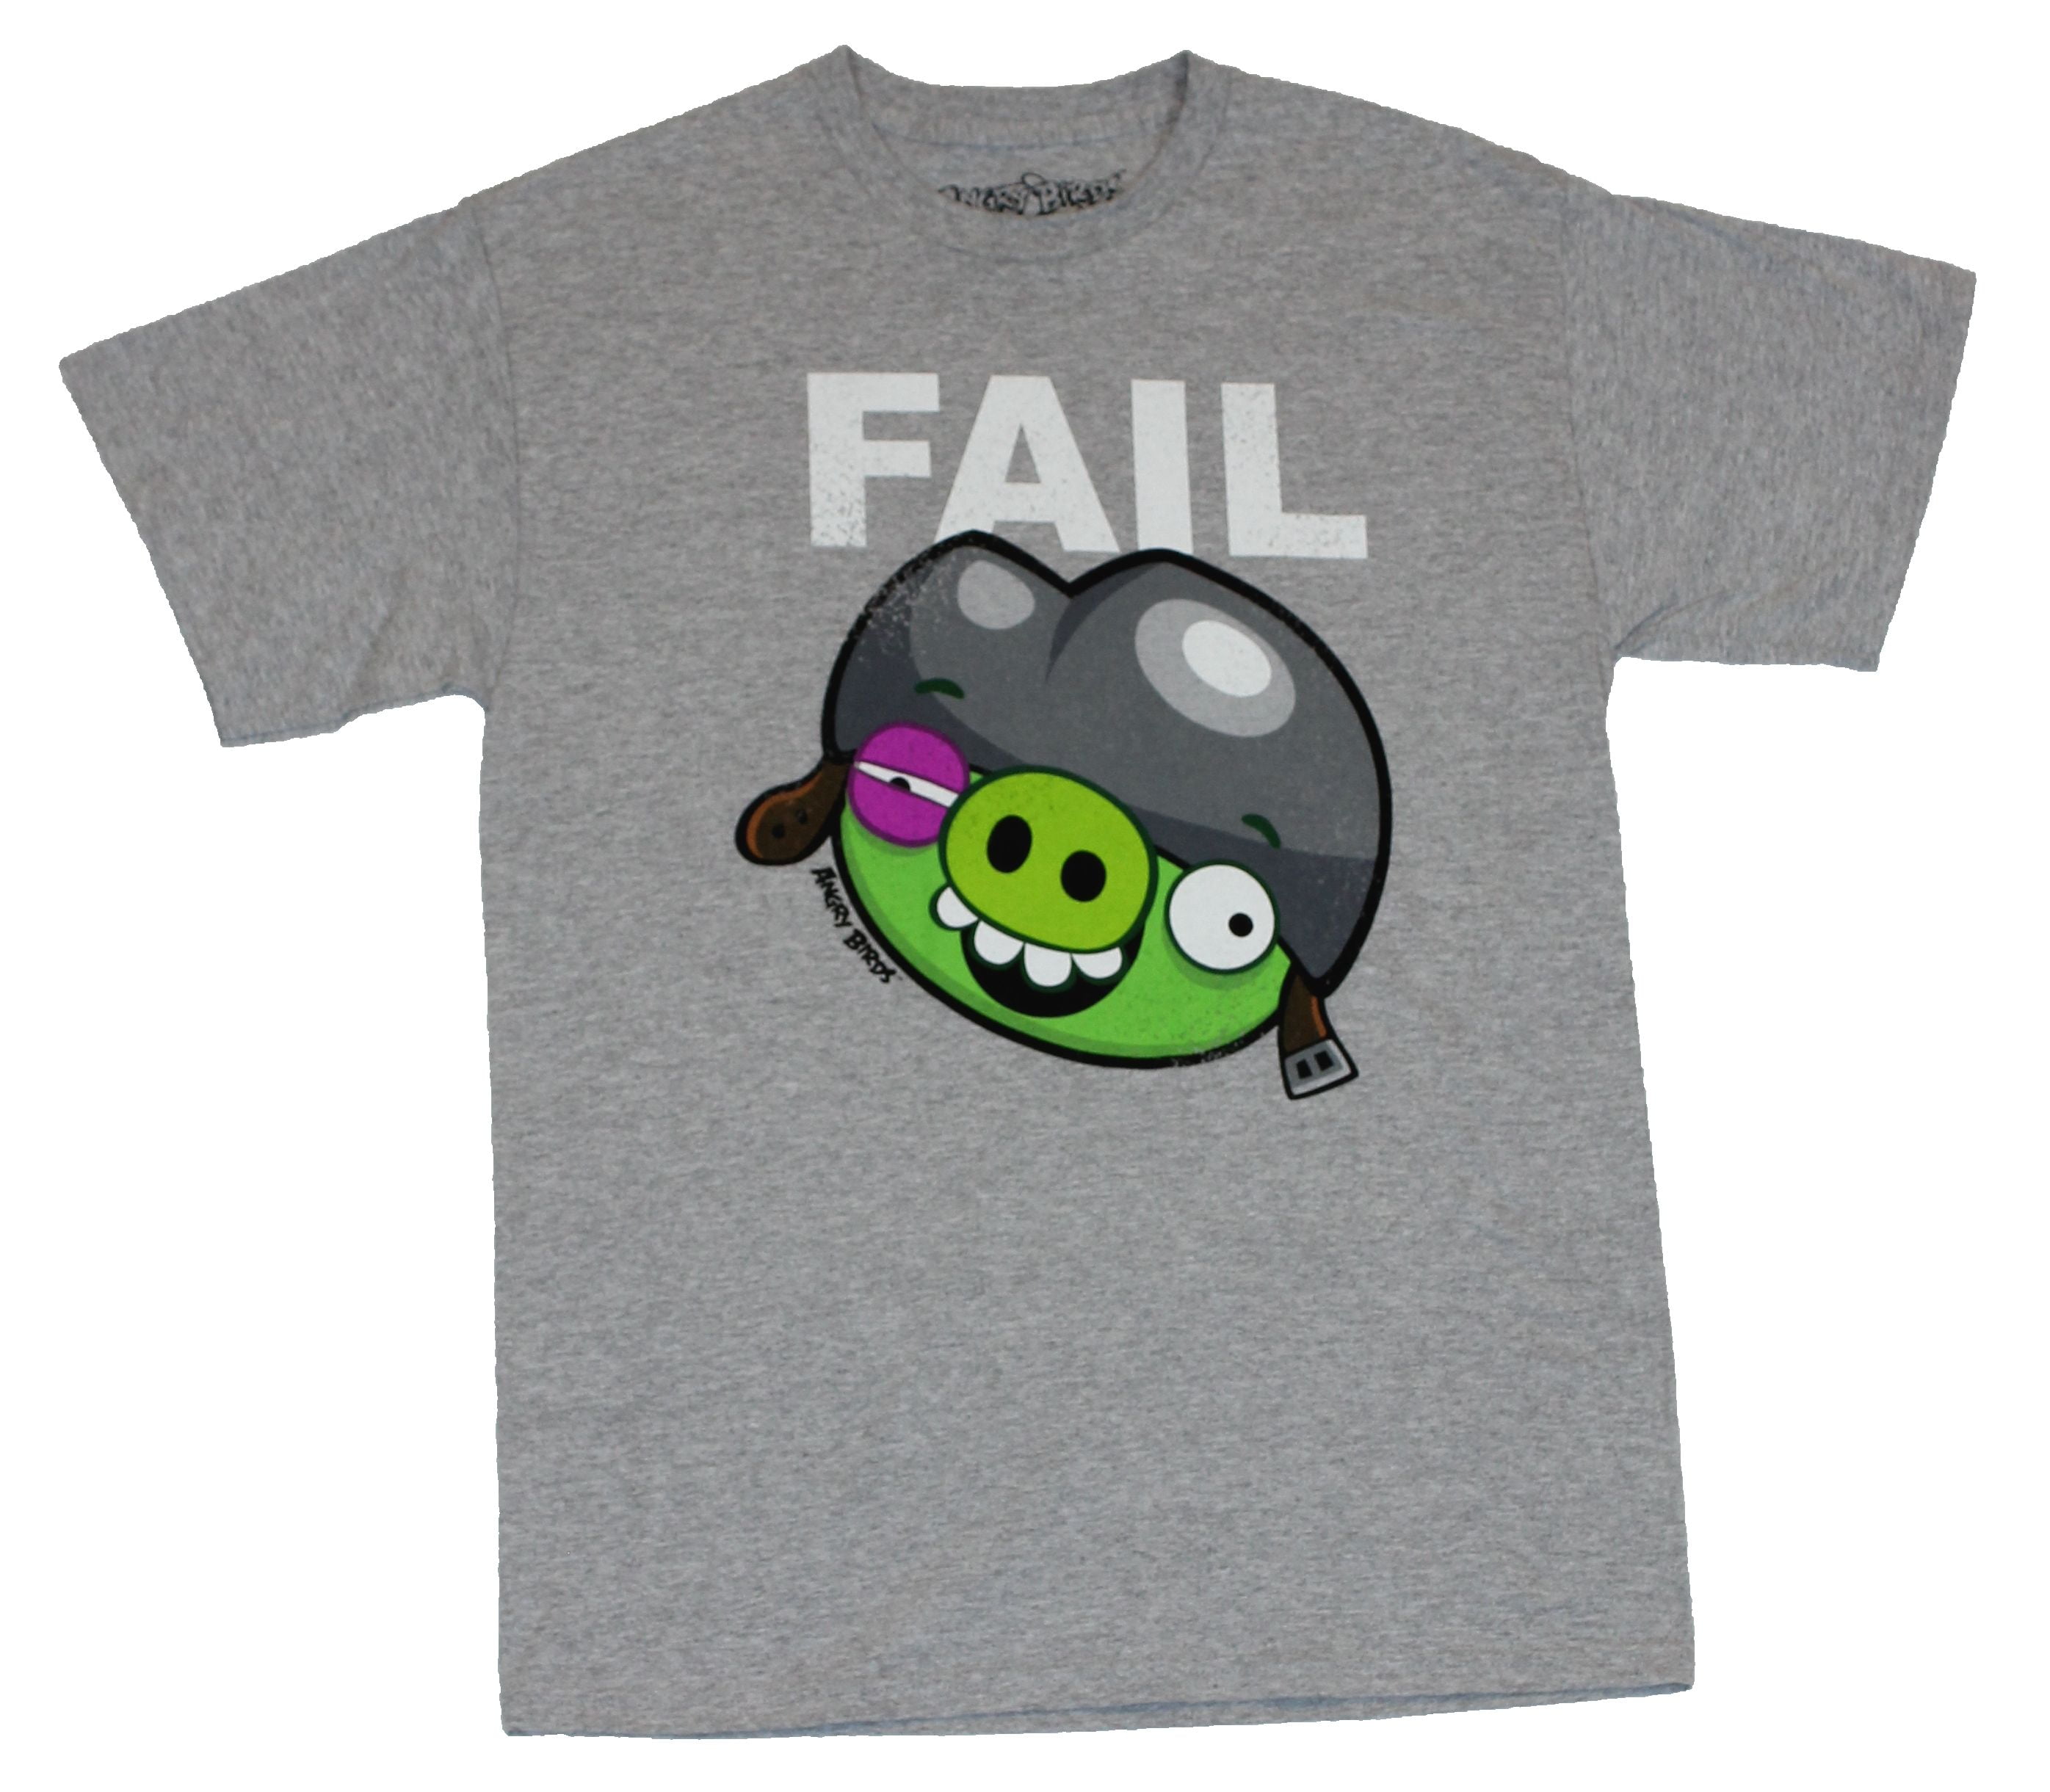 Angry Birds Mens T-Shirt - Epic Fail Fail Bruised Pig Graphic on Gray  (X-Large) 